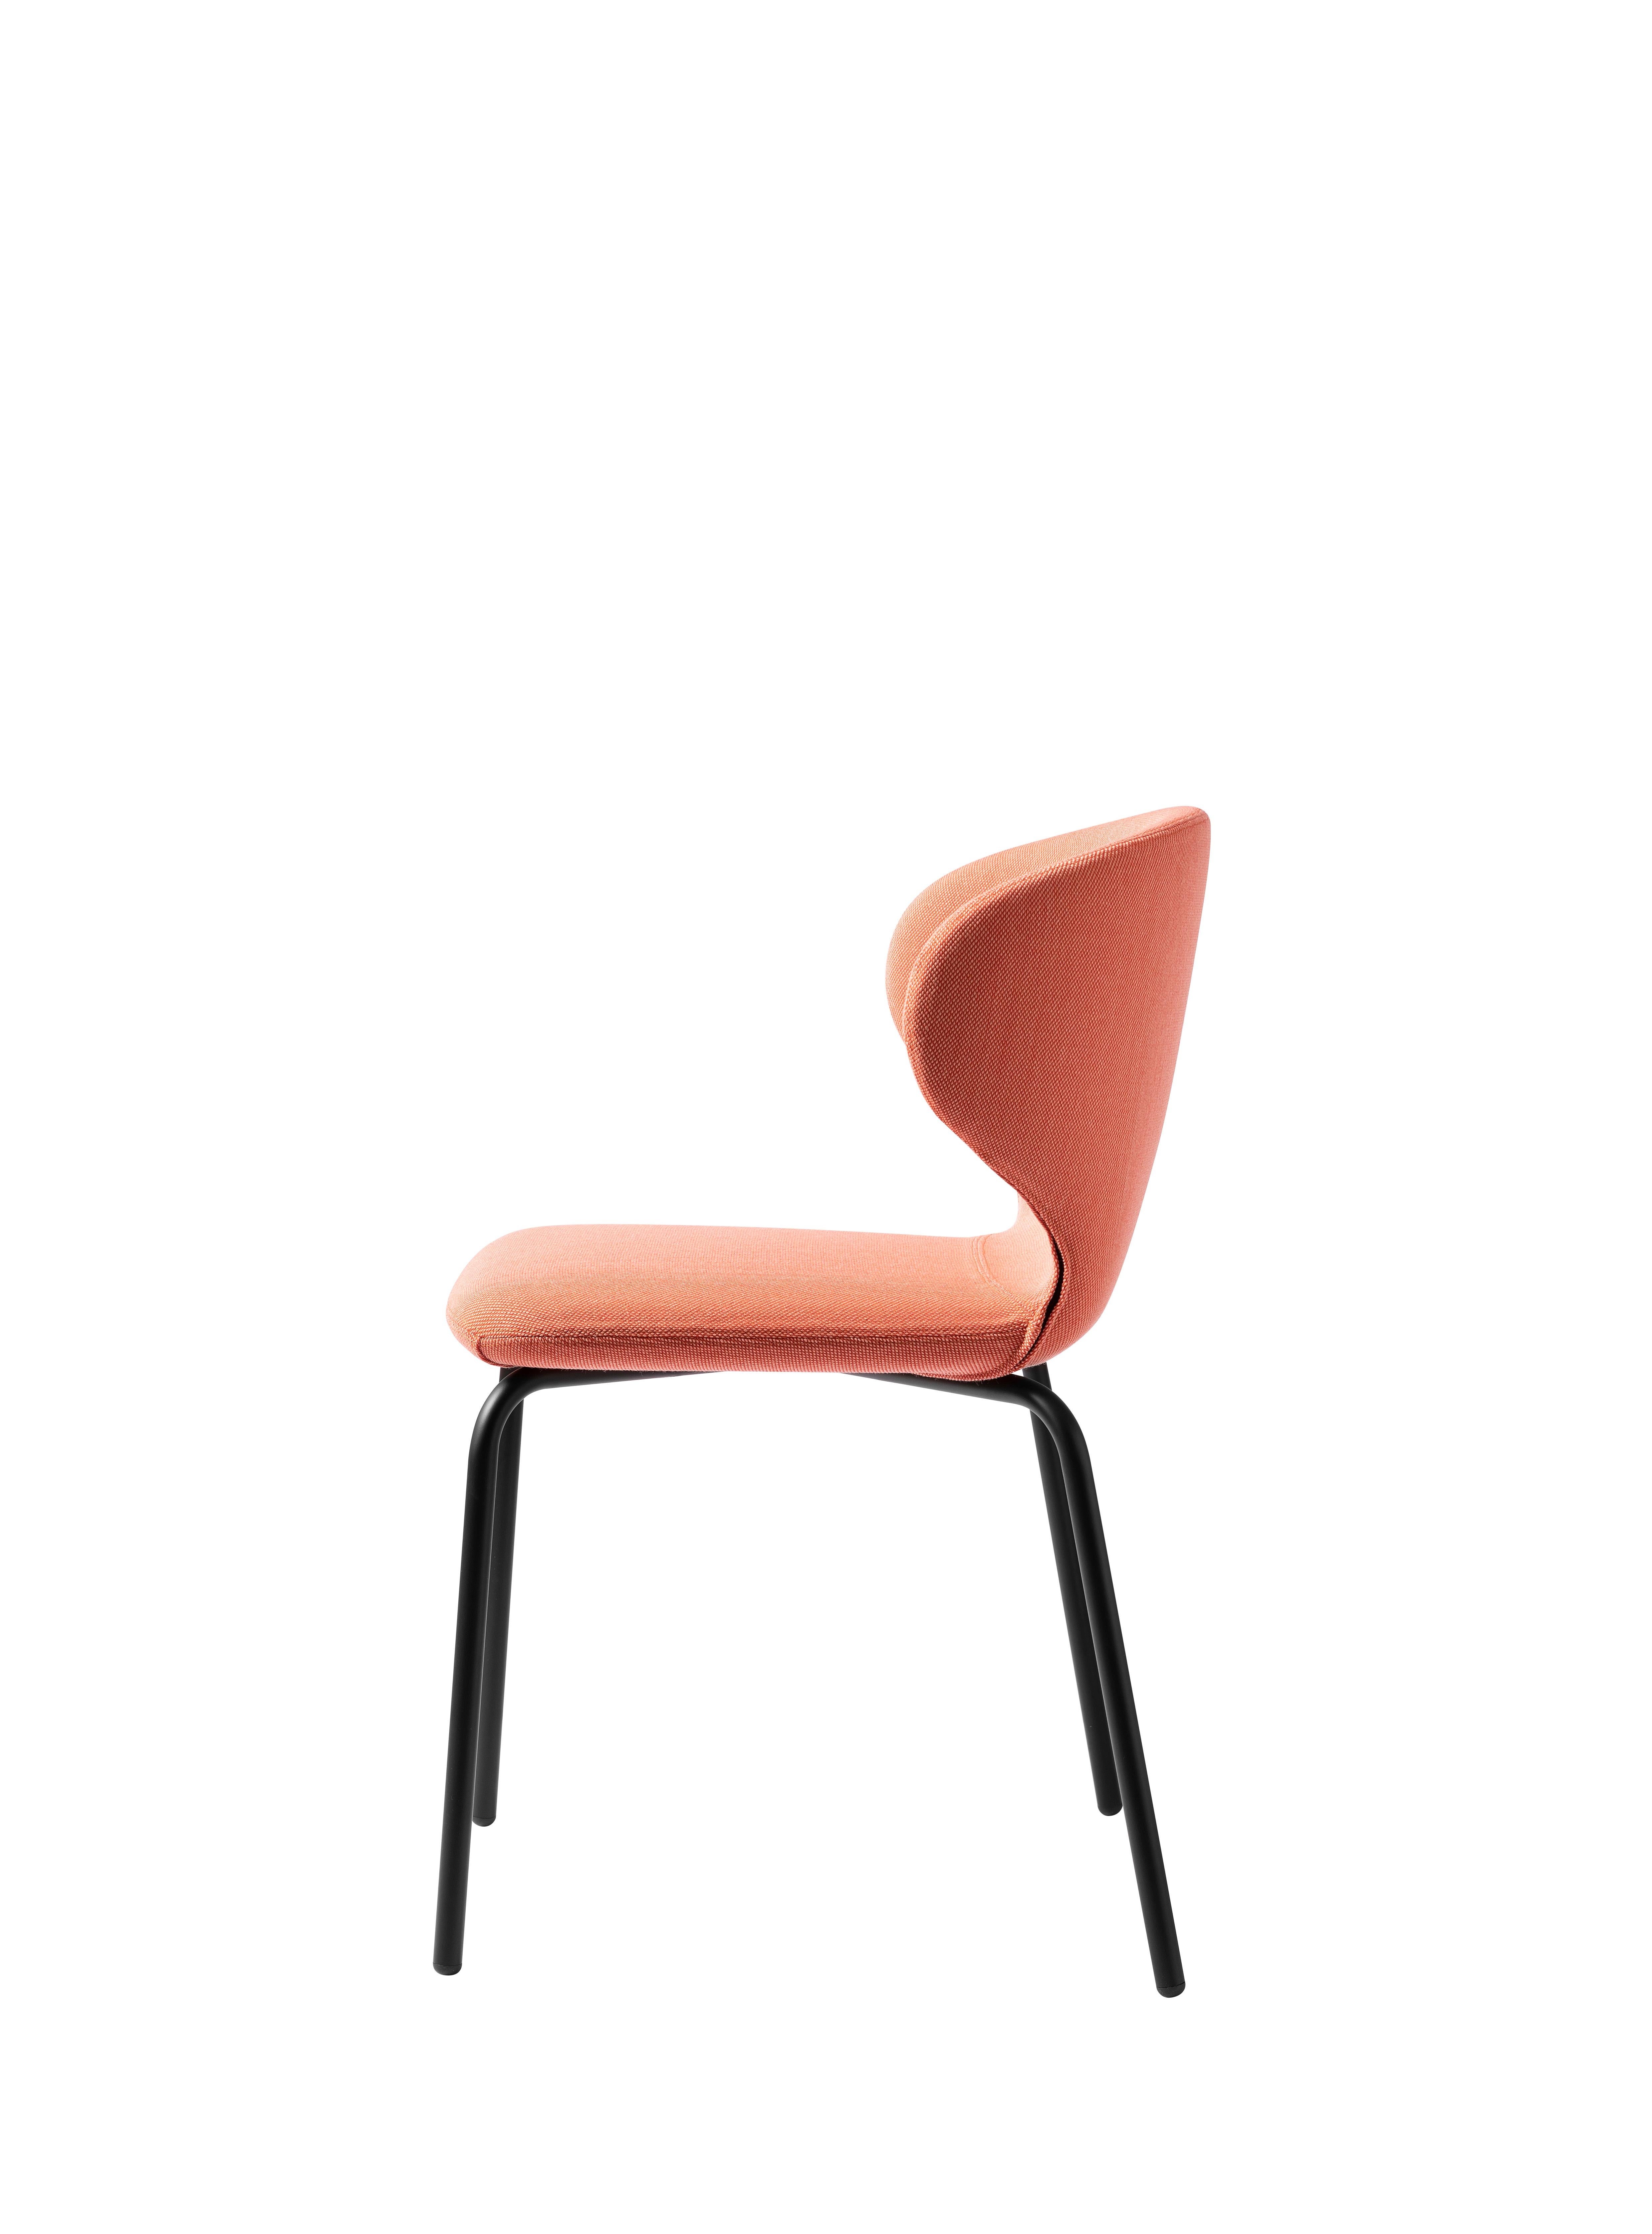 For Sale: Orange (Kvadrat Steelcut Trio 3 - 526, Coral) Mula Chair in Black Metal Leg Base with Upholstery Seat, by E-GGs 2